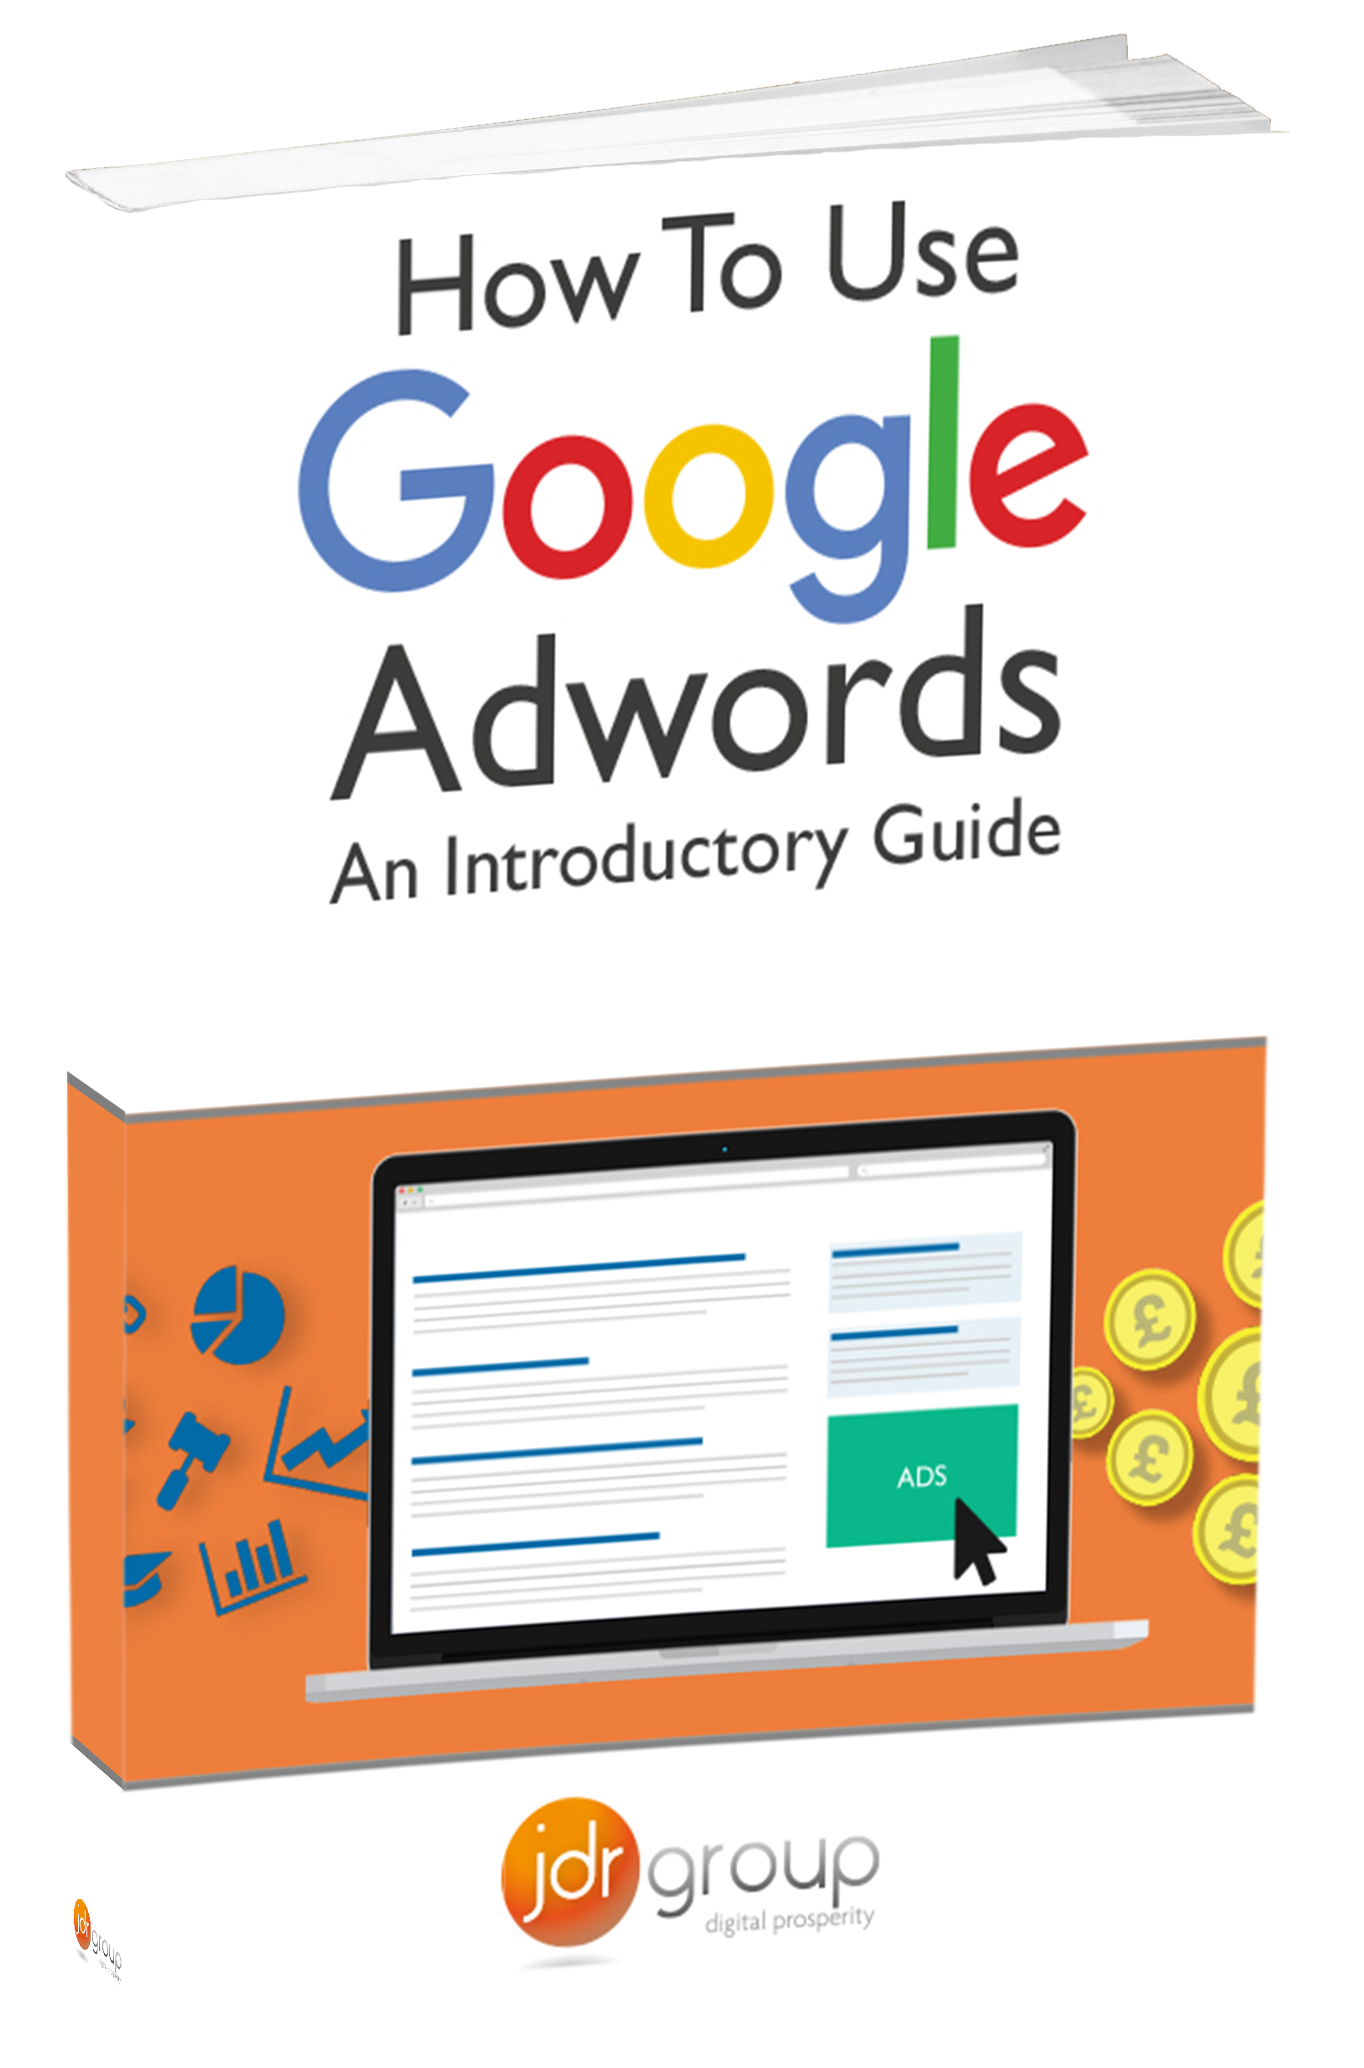 How To Use Google Adwords